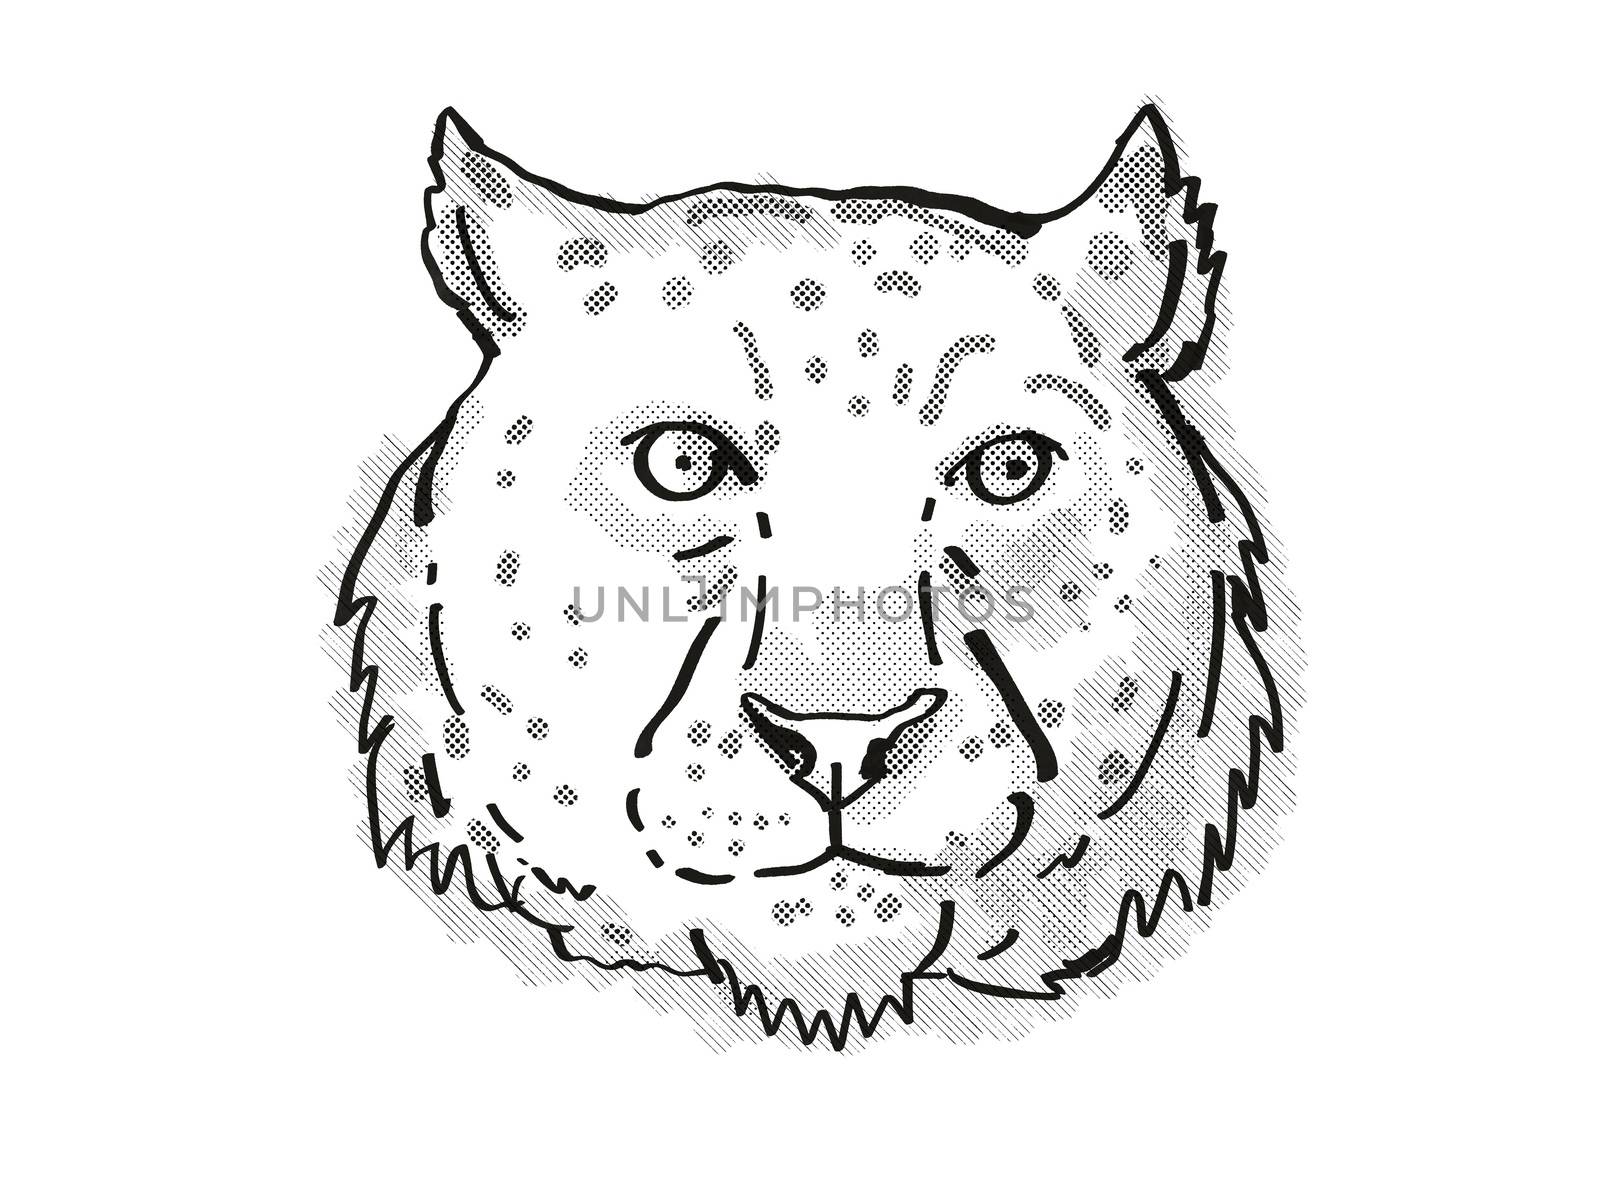 Retro cartoon style drawing of head of a snow leopard, an endangered wildlife species on isolated white background done in black and white.